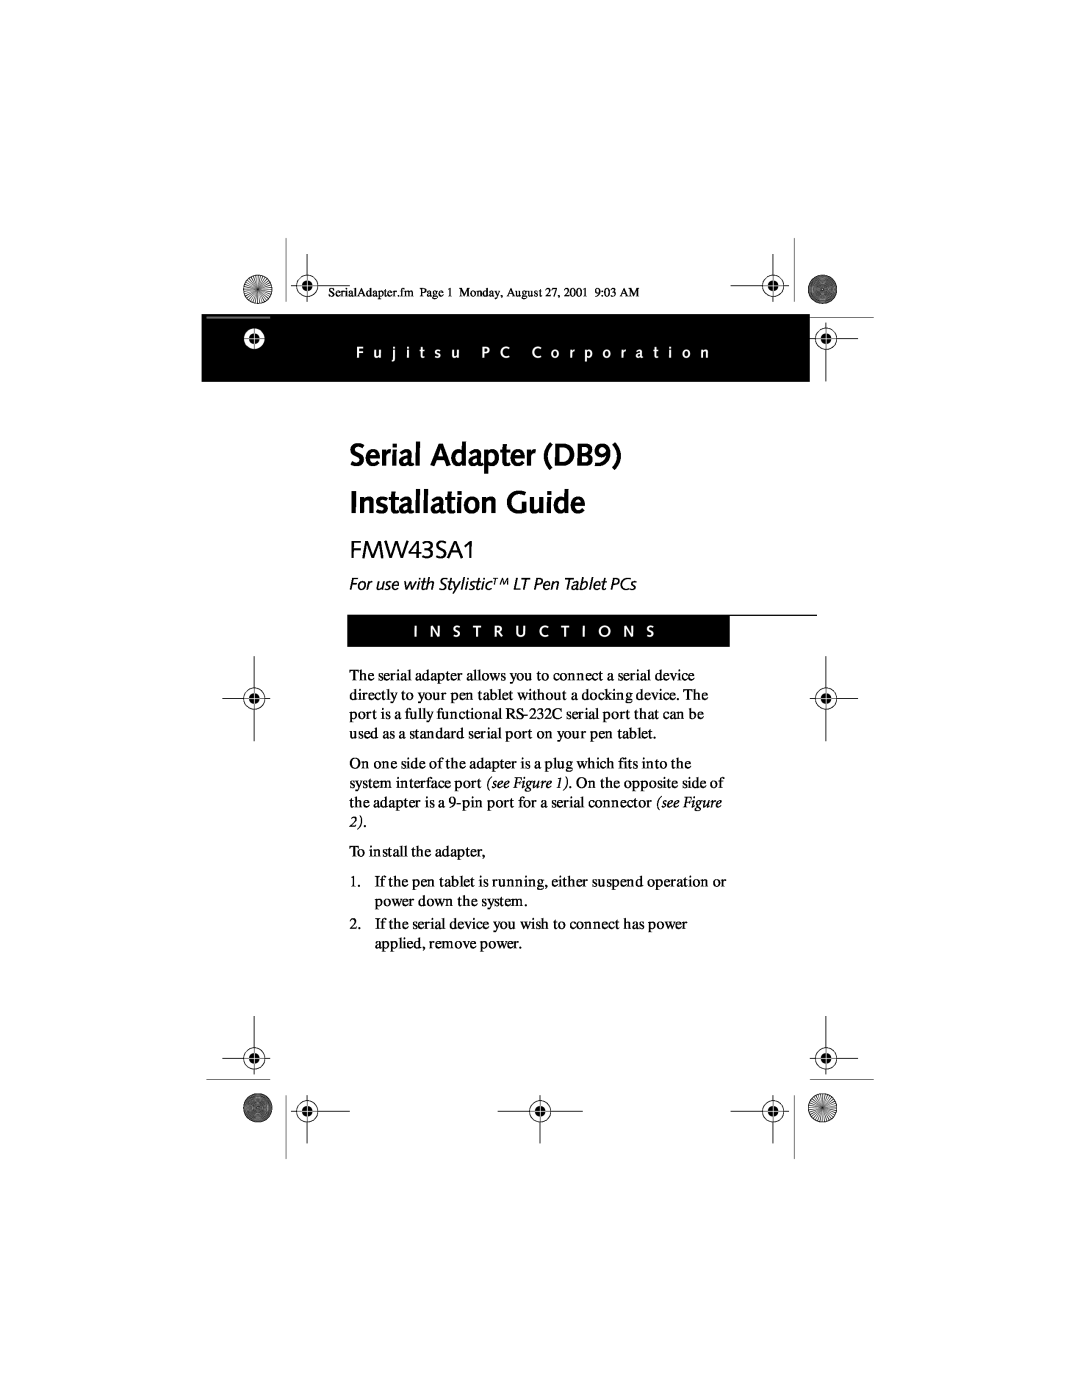 Fujitsu FMW43SA1 manual Serial Adapter DB9 Installation Guide, For use with StylisticT M LT Pen Tablet PCs 